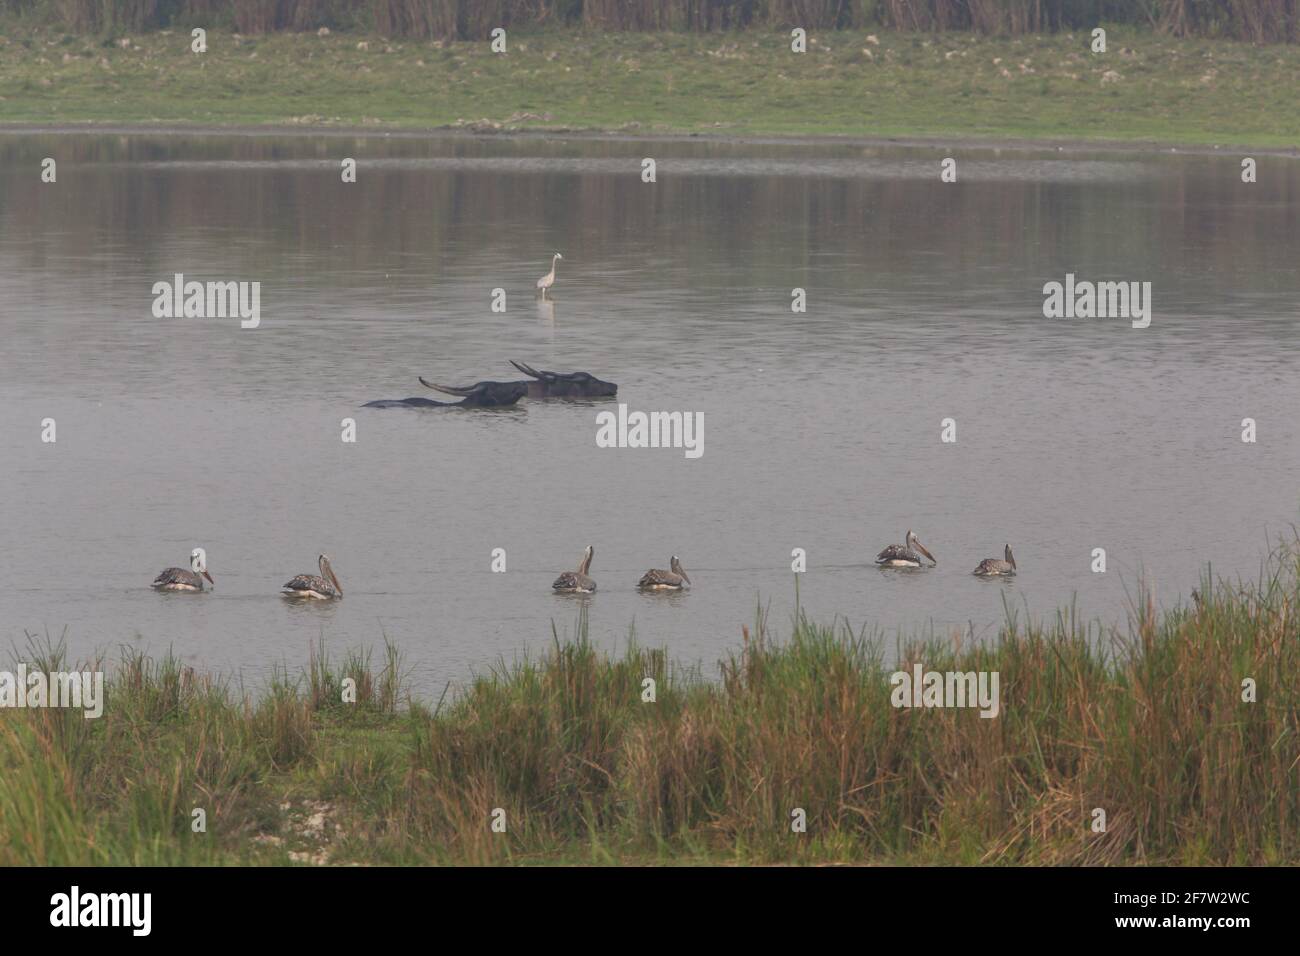 Asiatic Wild Water Buffalos and Pelicans swimming in a lake in Kaziranga National Park (India) Stock Photo